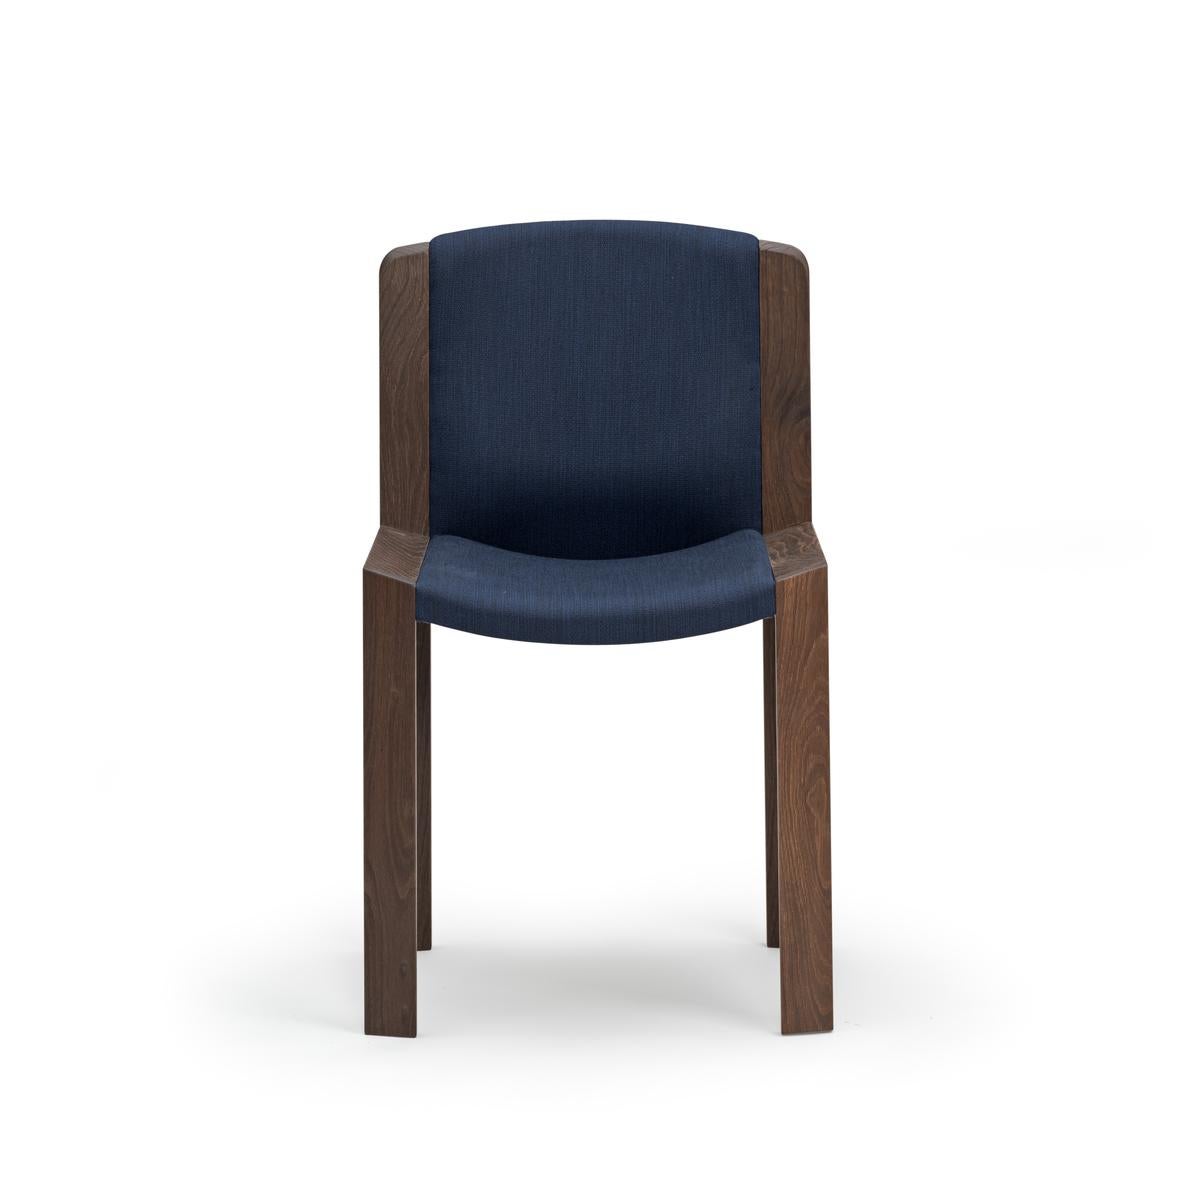 Joe Colombo 'Chair 300' Wood and Sørensen Leather Chair by Karakter For Sale 6